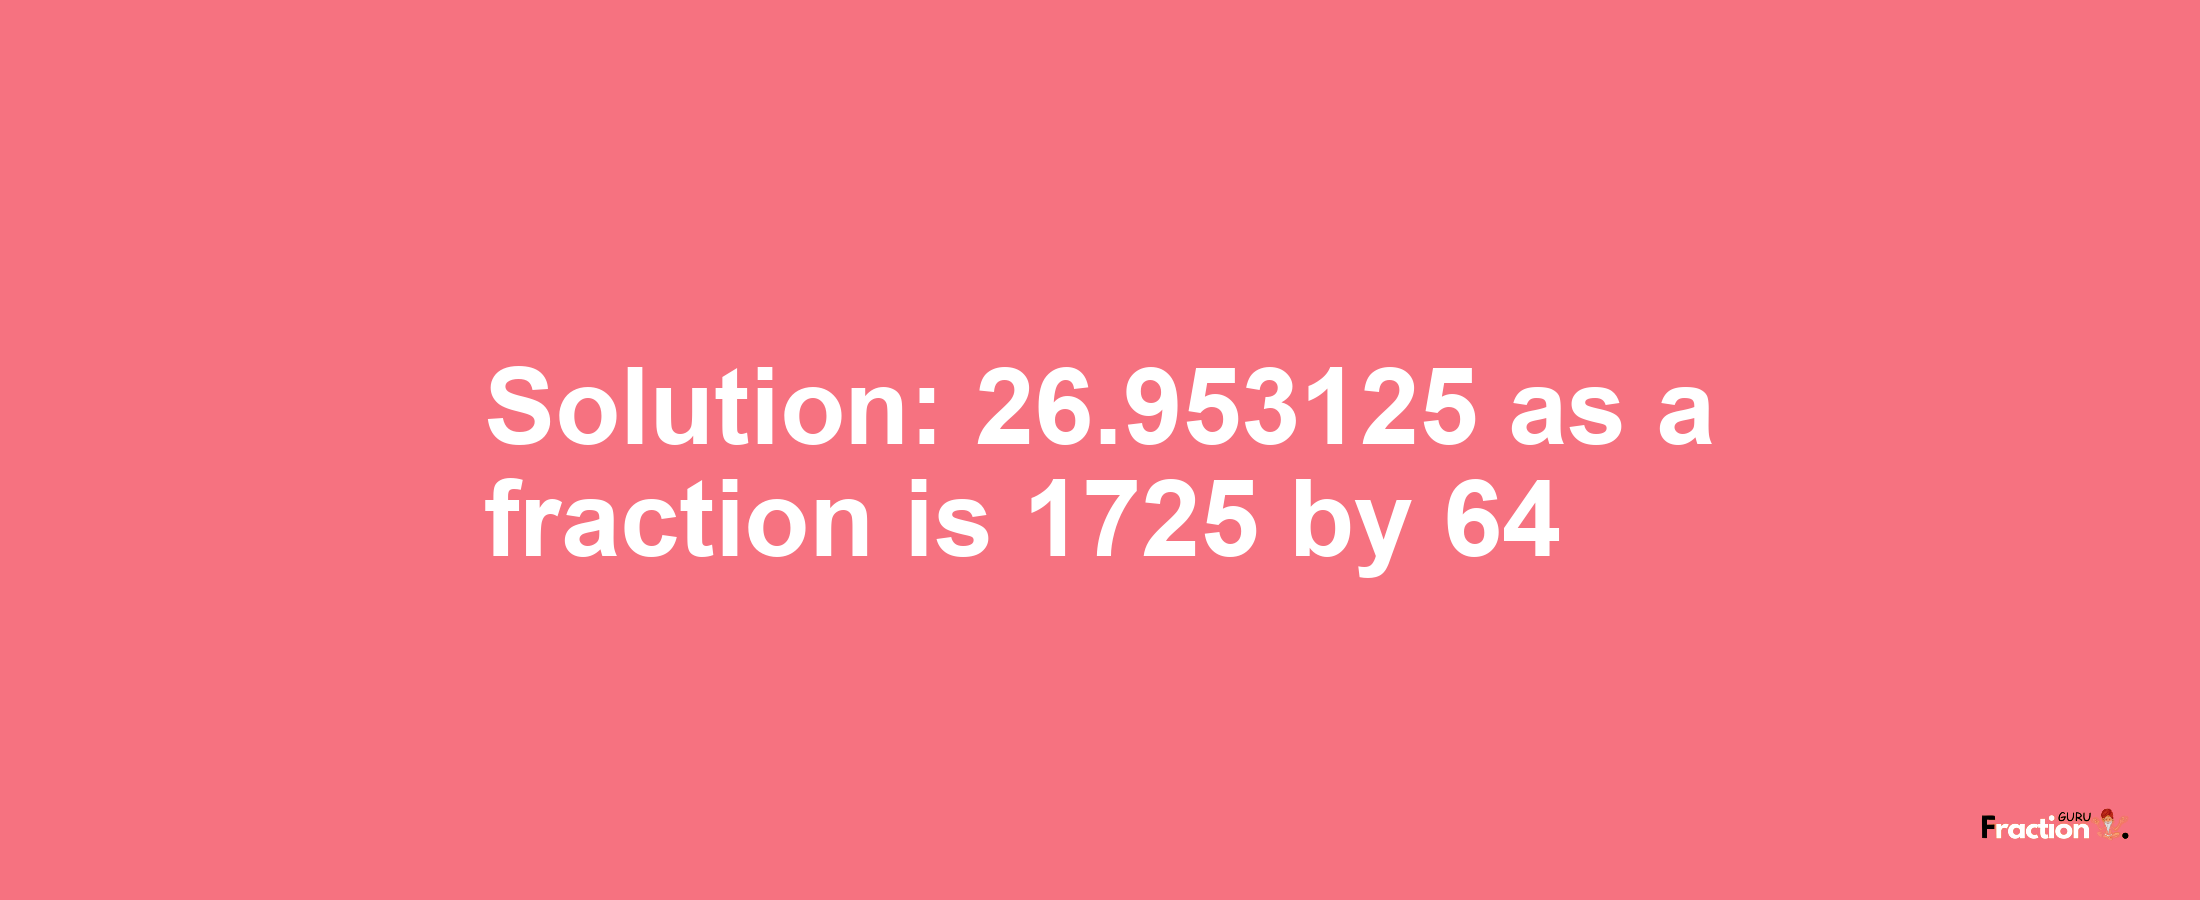 Solution:26.953125 as a fraction is 1725/64